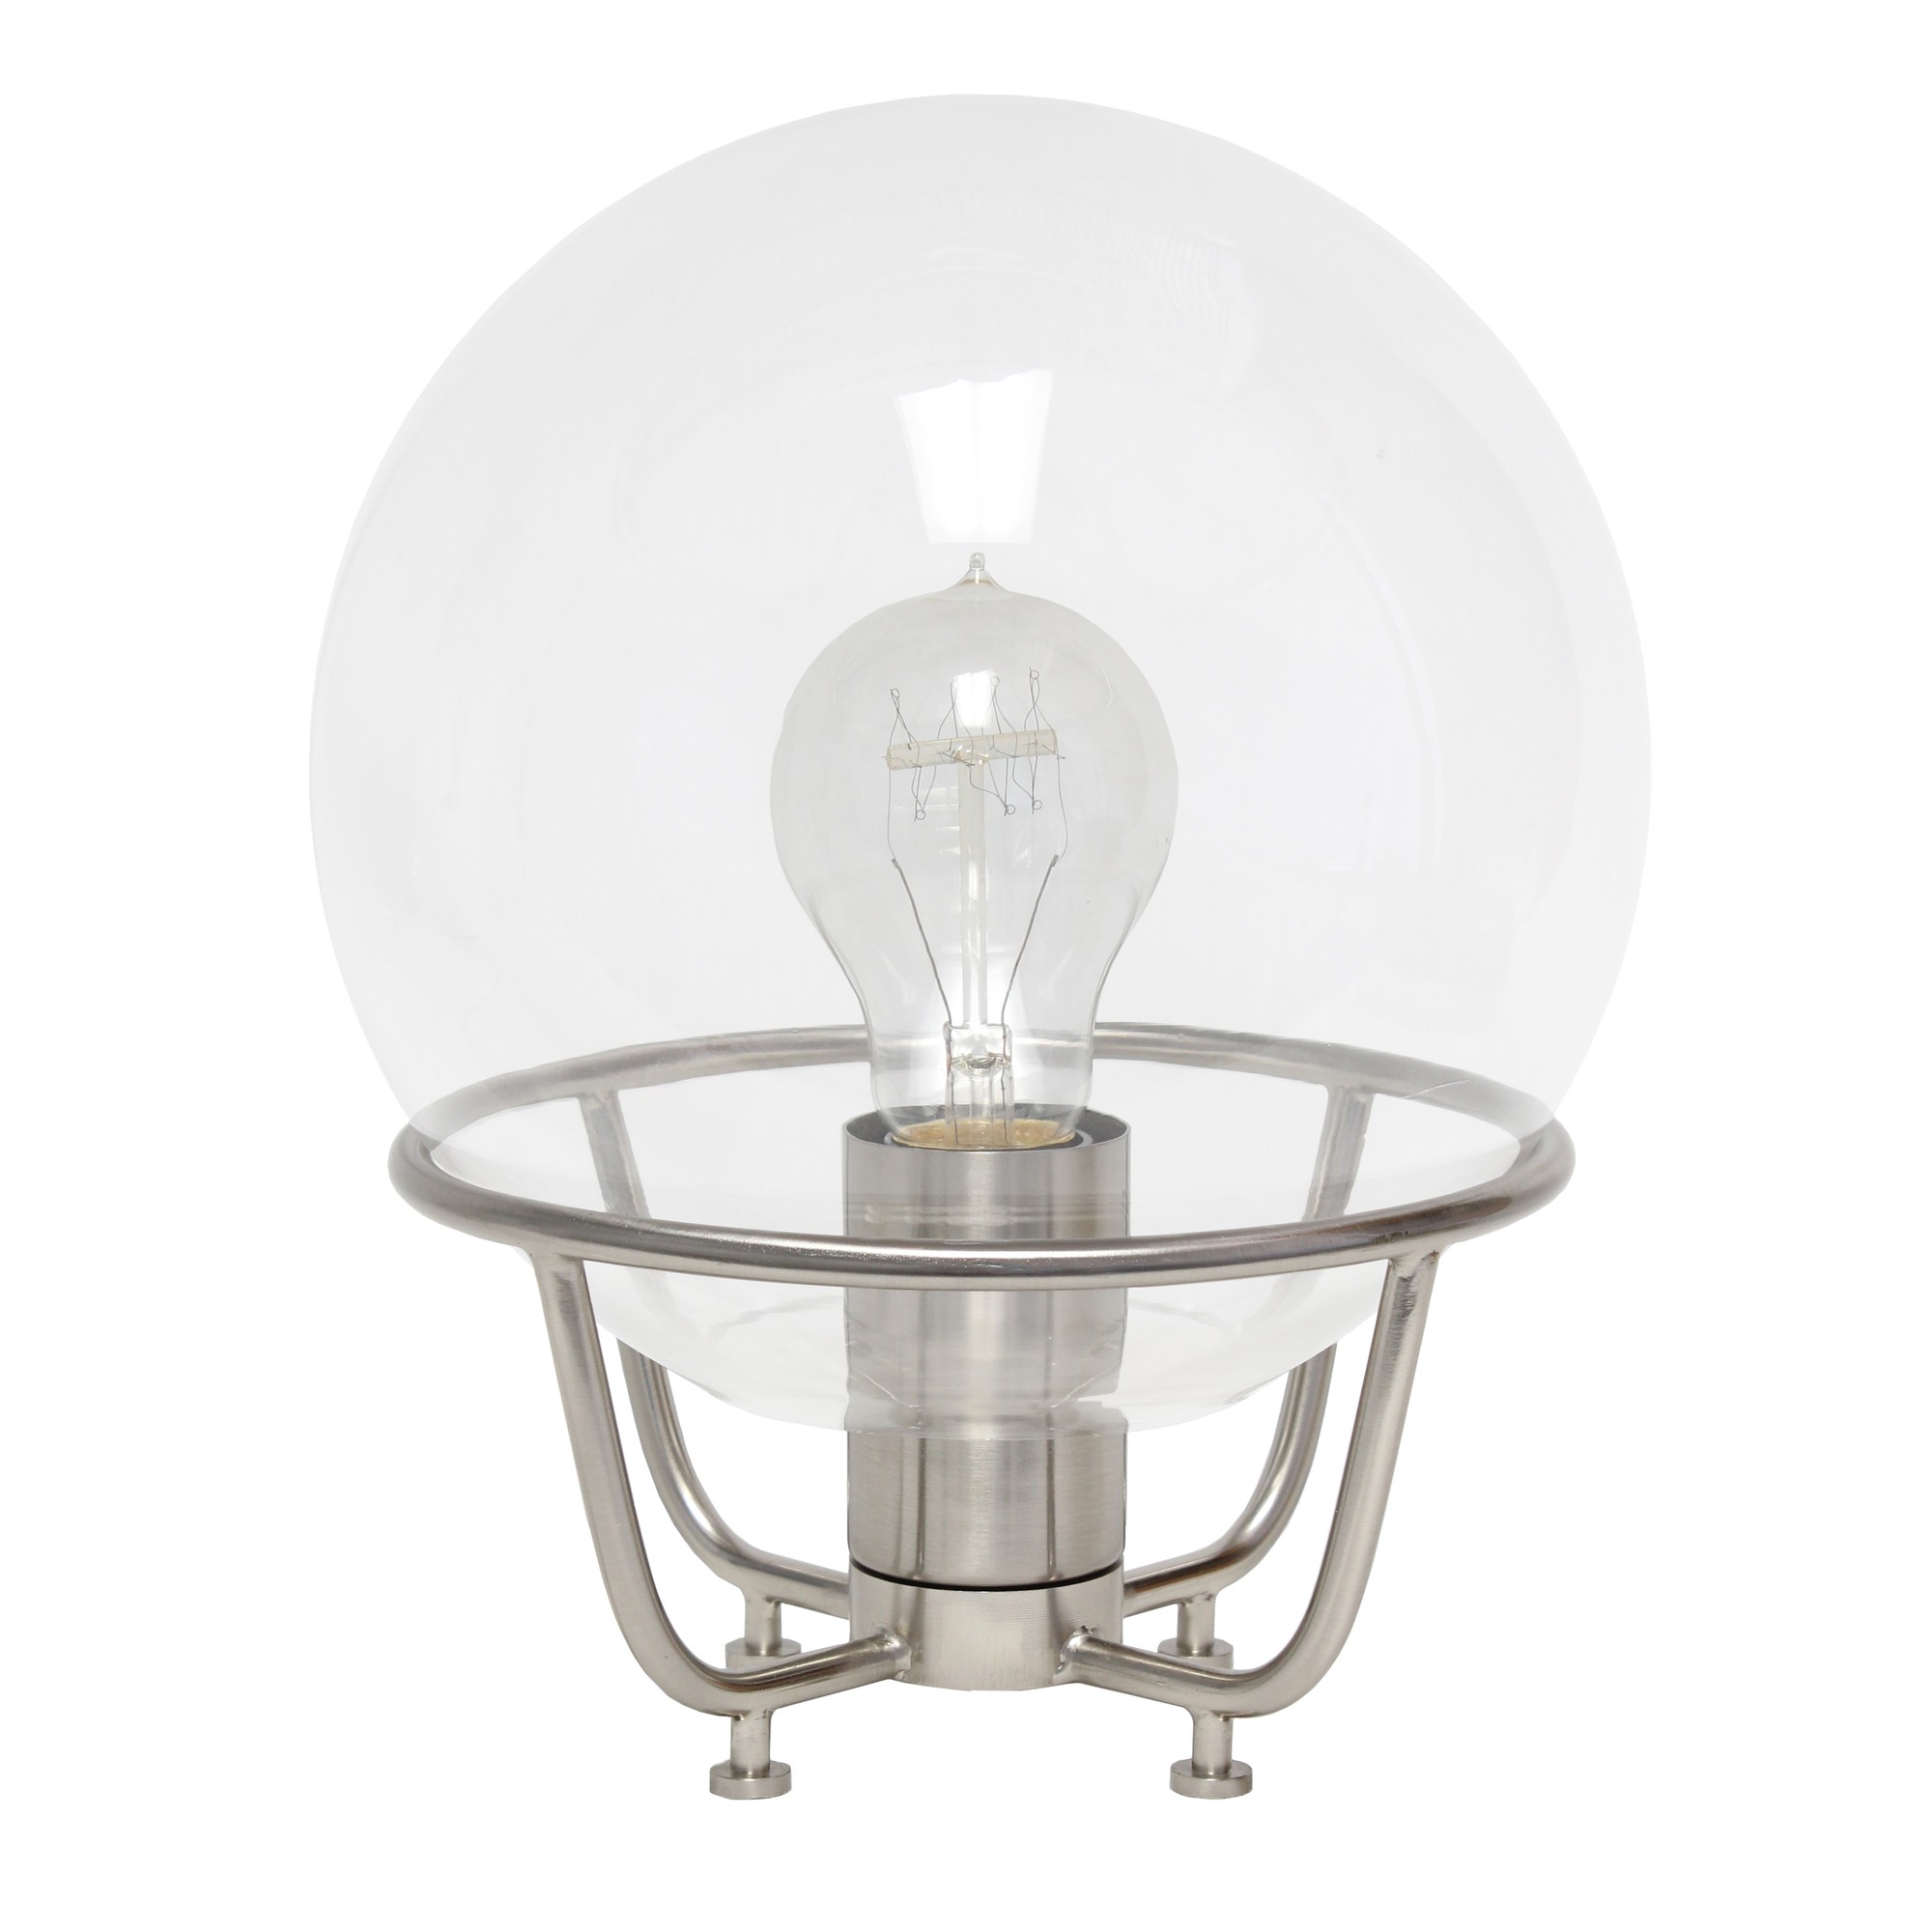 Lalia Home Old World Globe Glass Table Lamp, Brushed Nickel